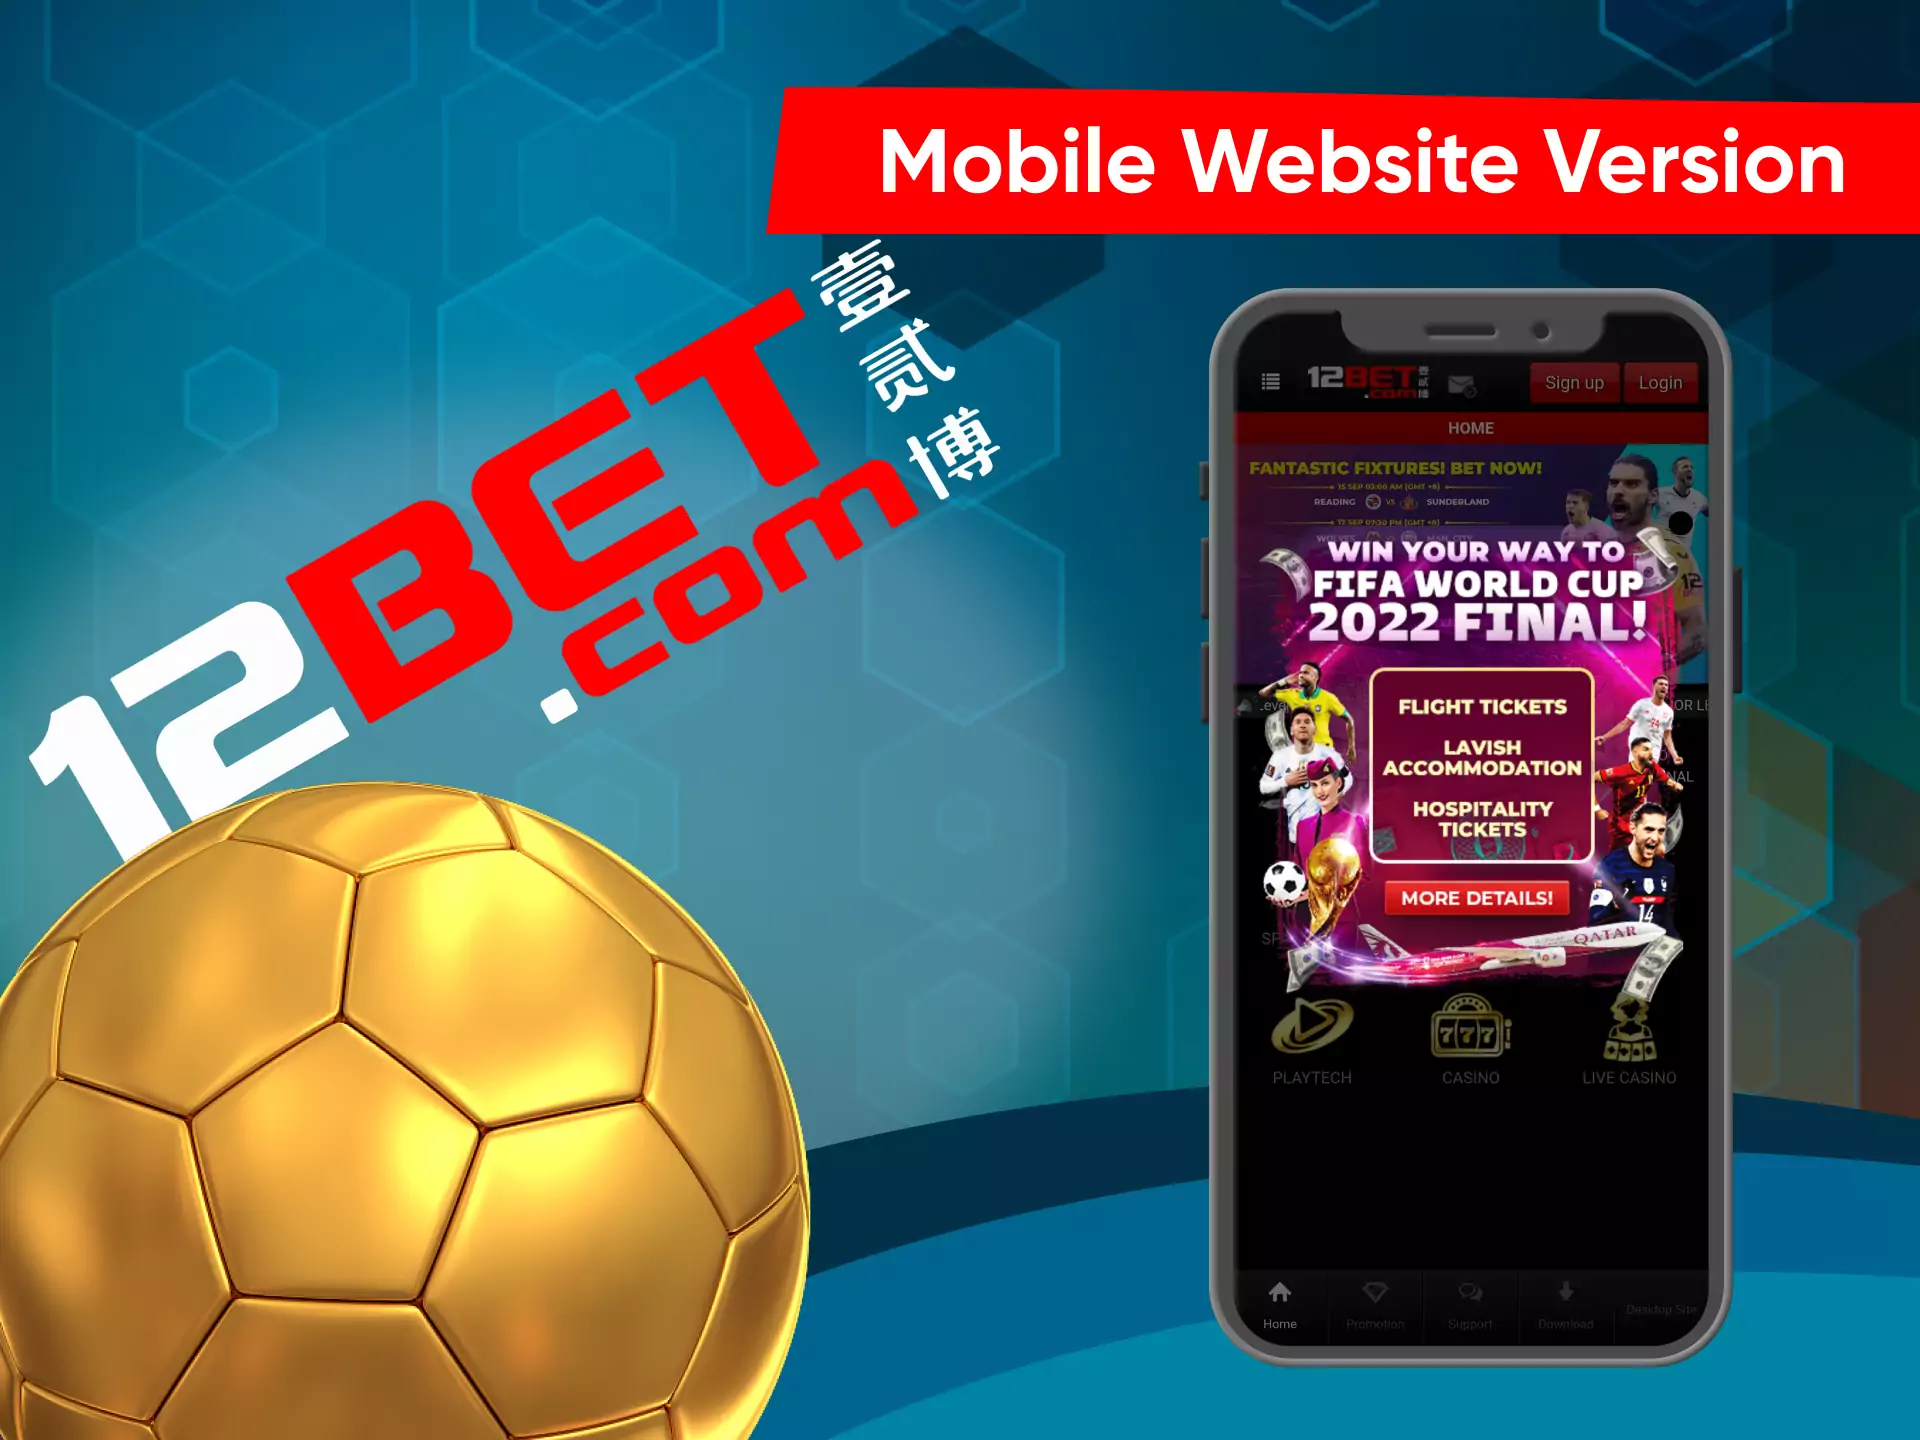 From a smartphone, you can use the mobile site of 12bet.